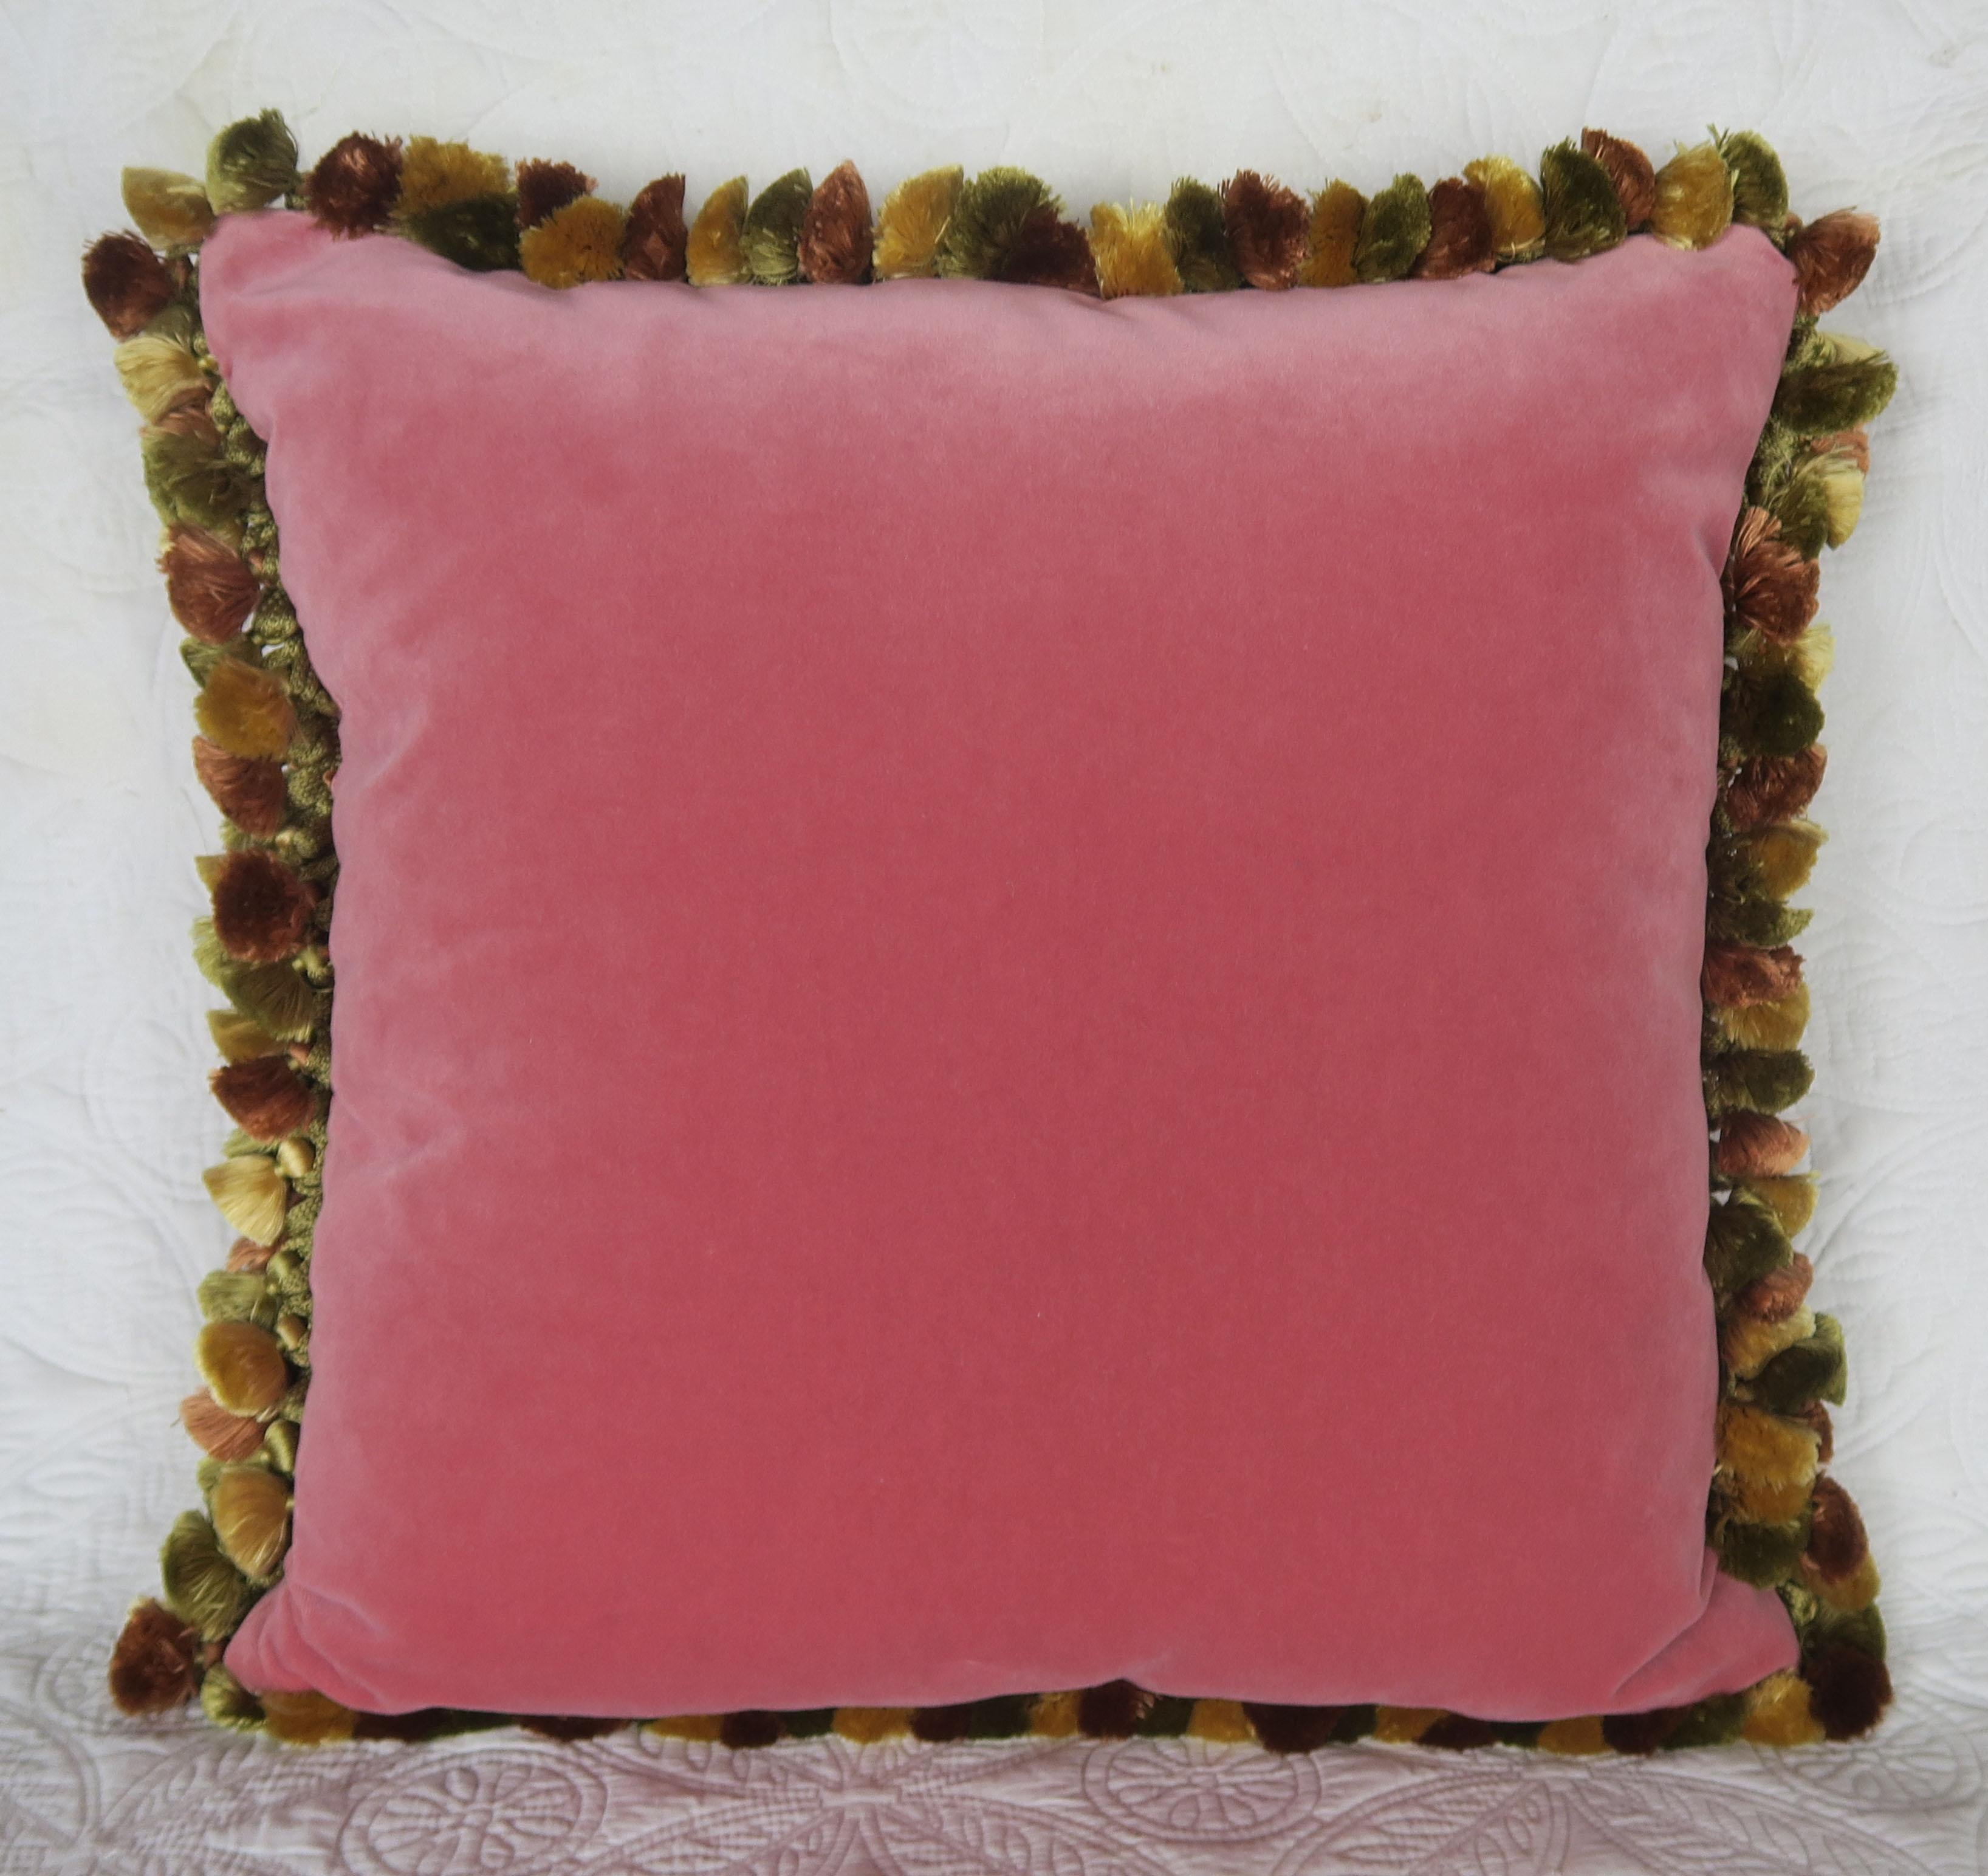 Rococo Metallic Appliqued Pink Velvet Pillow with Tassels by Melissa Levinson